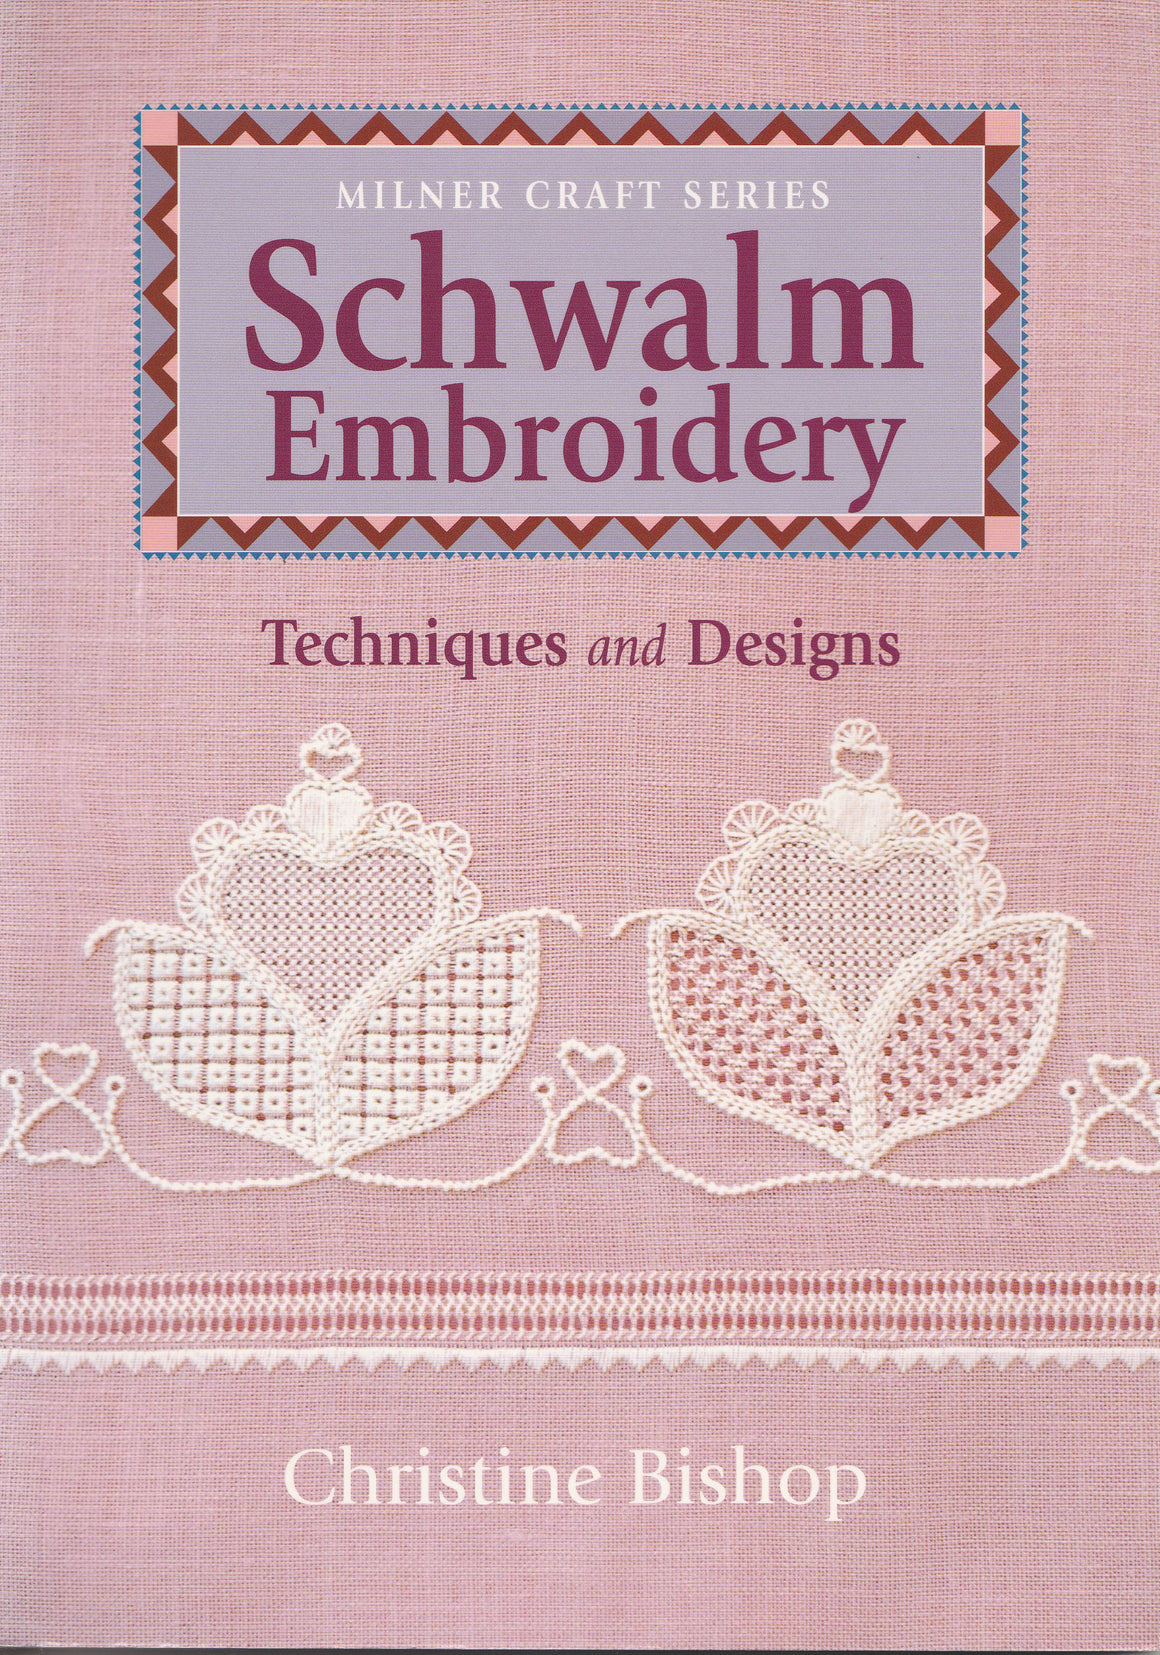 Schwalm Embroidery